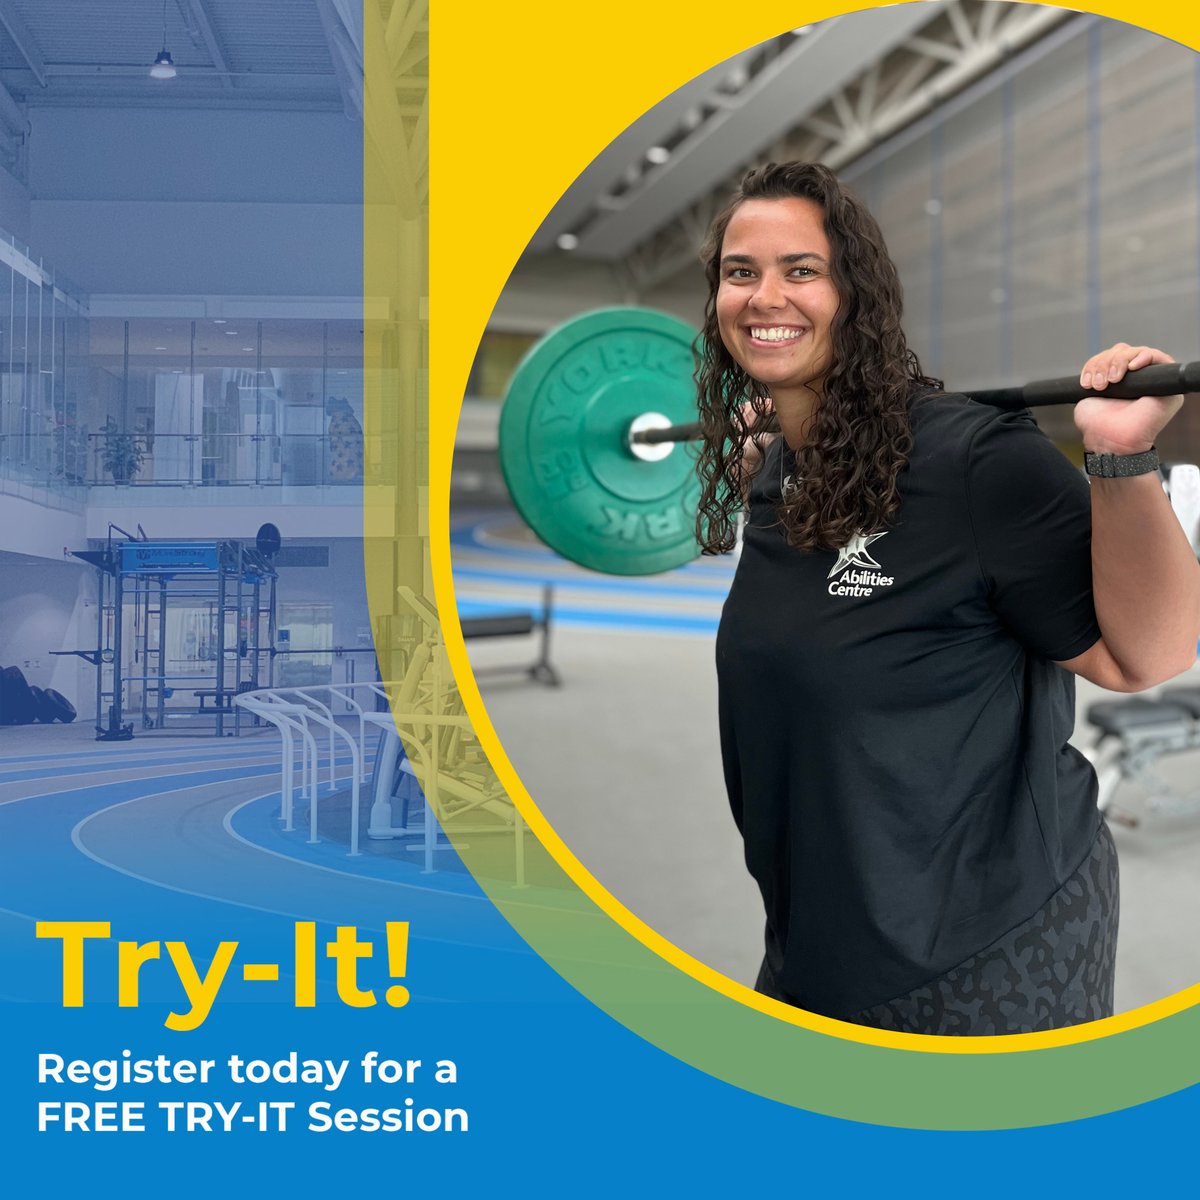 Come on out and try something new with @AbilitiesCentre! Try-it Sessions are now open for registration! Join us for this FREE community event to try some of our member-based classes! Visit: ow.ly/AnPo50Ky7Rl to register